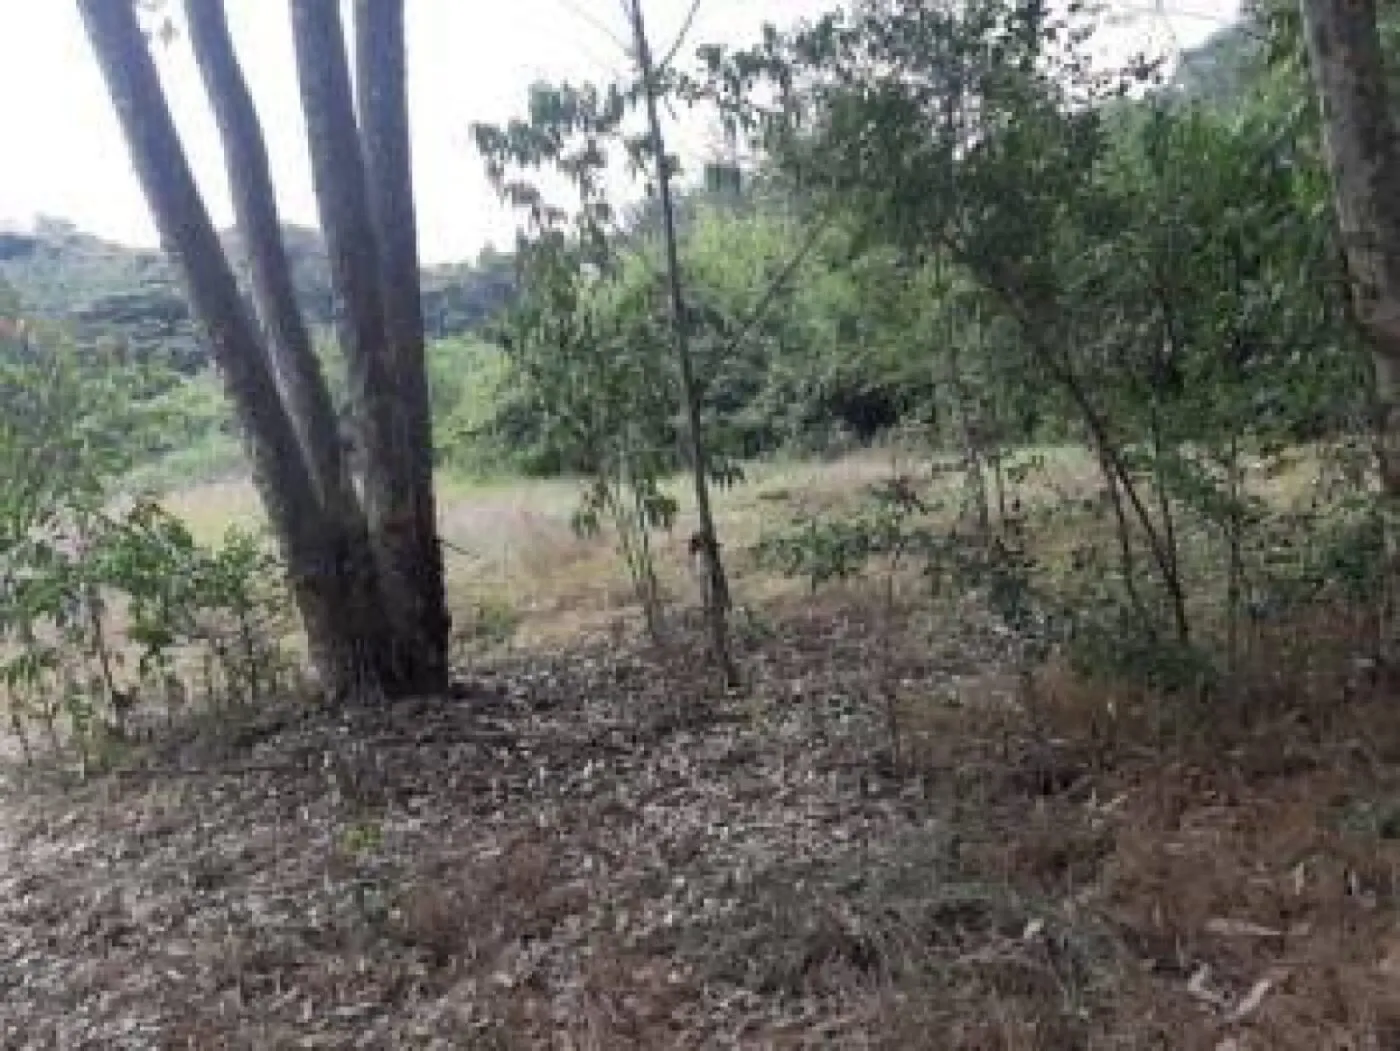 Land For Sale Real Estate-Land for sale in Karen Hardy 1/2 Acre @30M Ready Title Deed QUICK SALE Exclusive half acre 0.5🔥 19